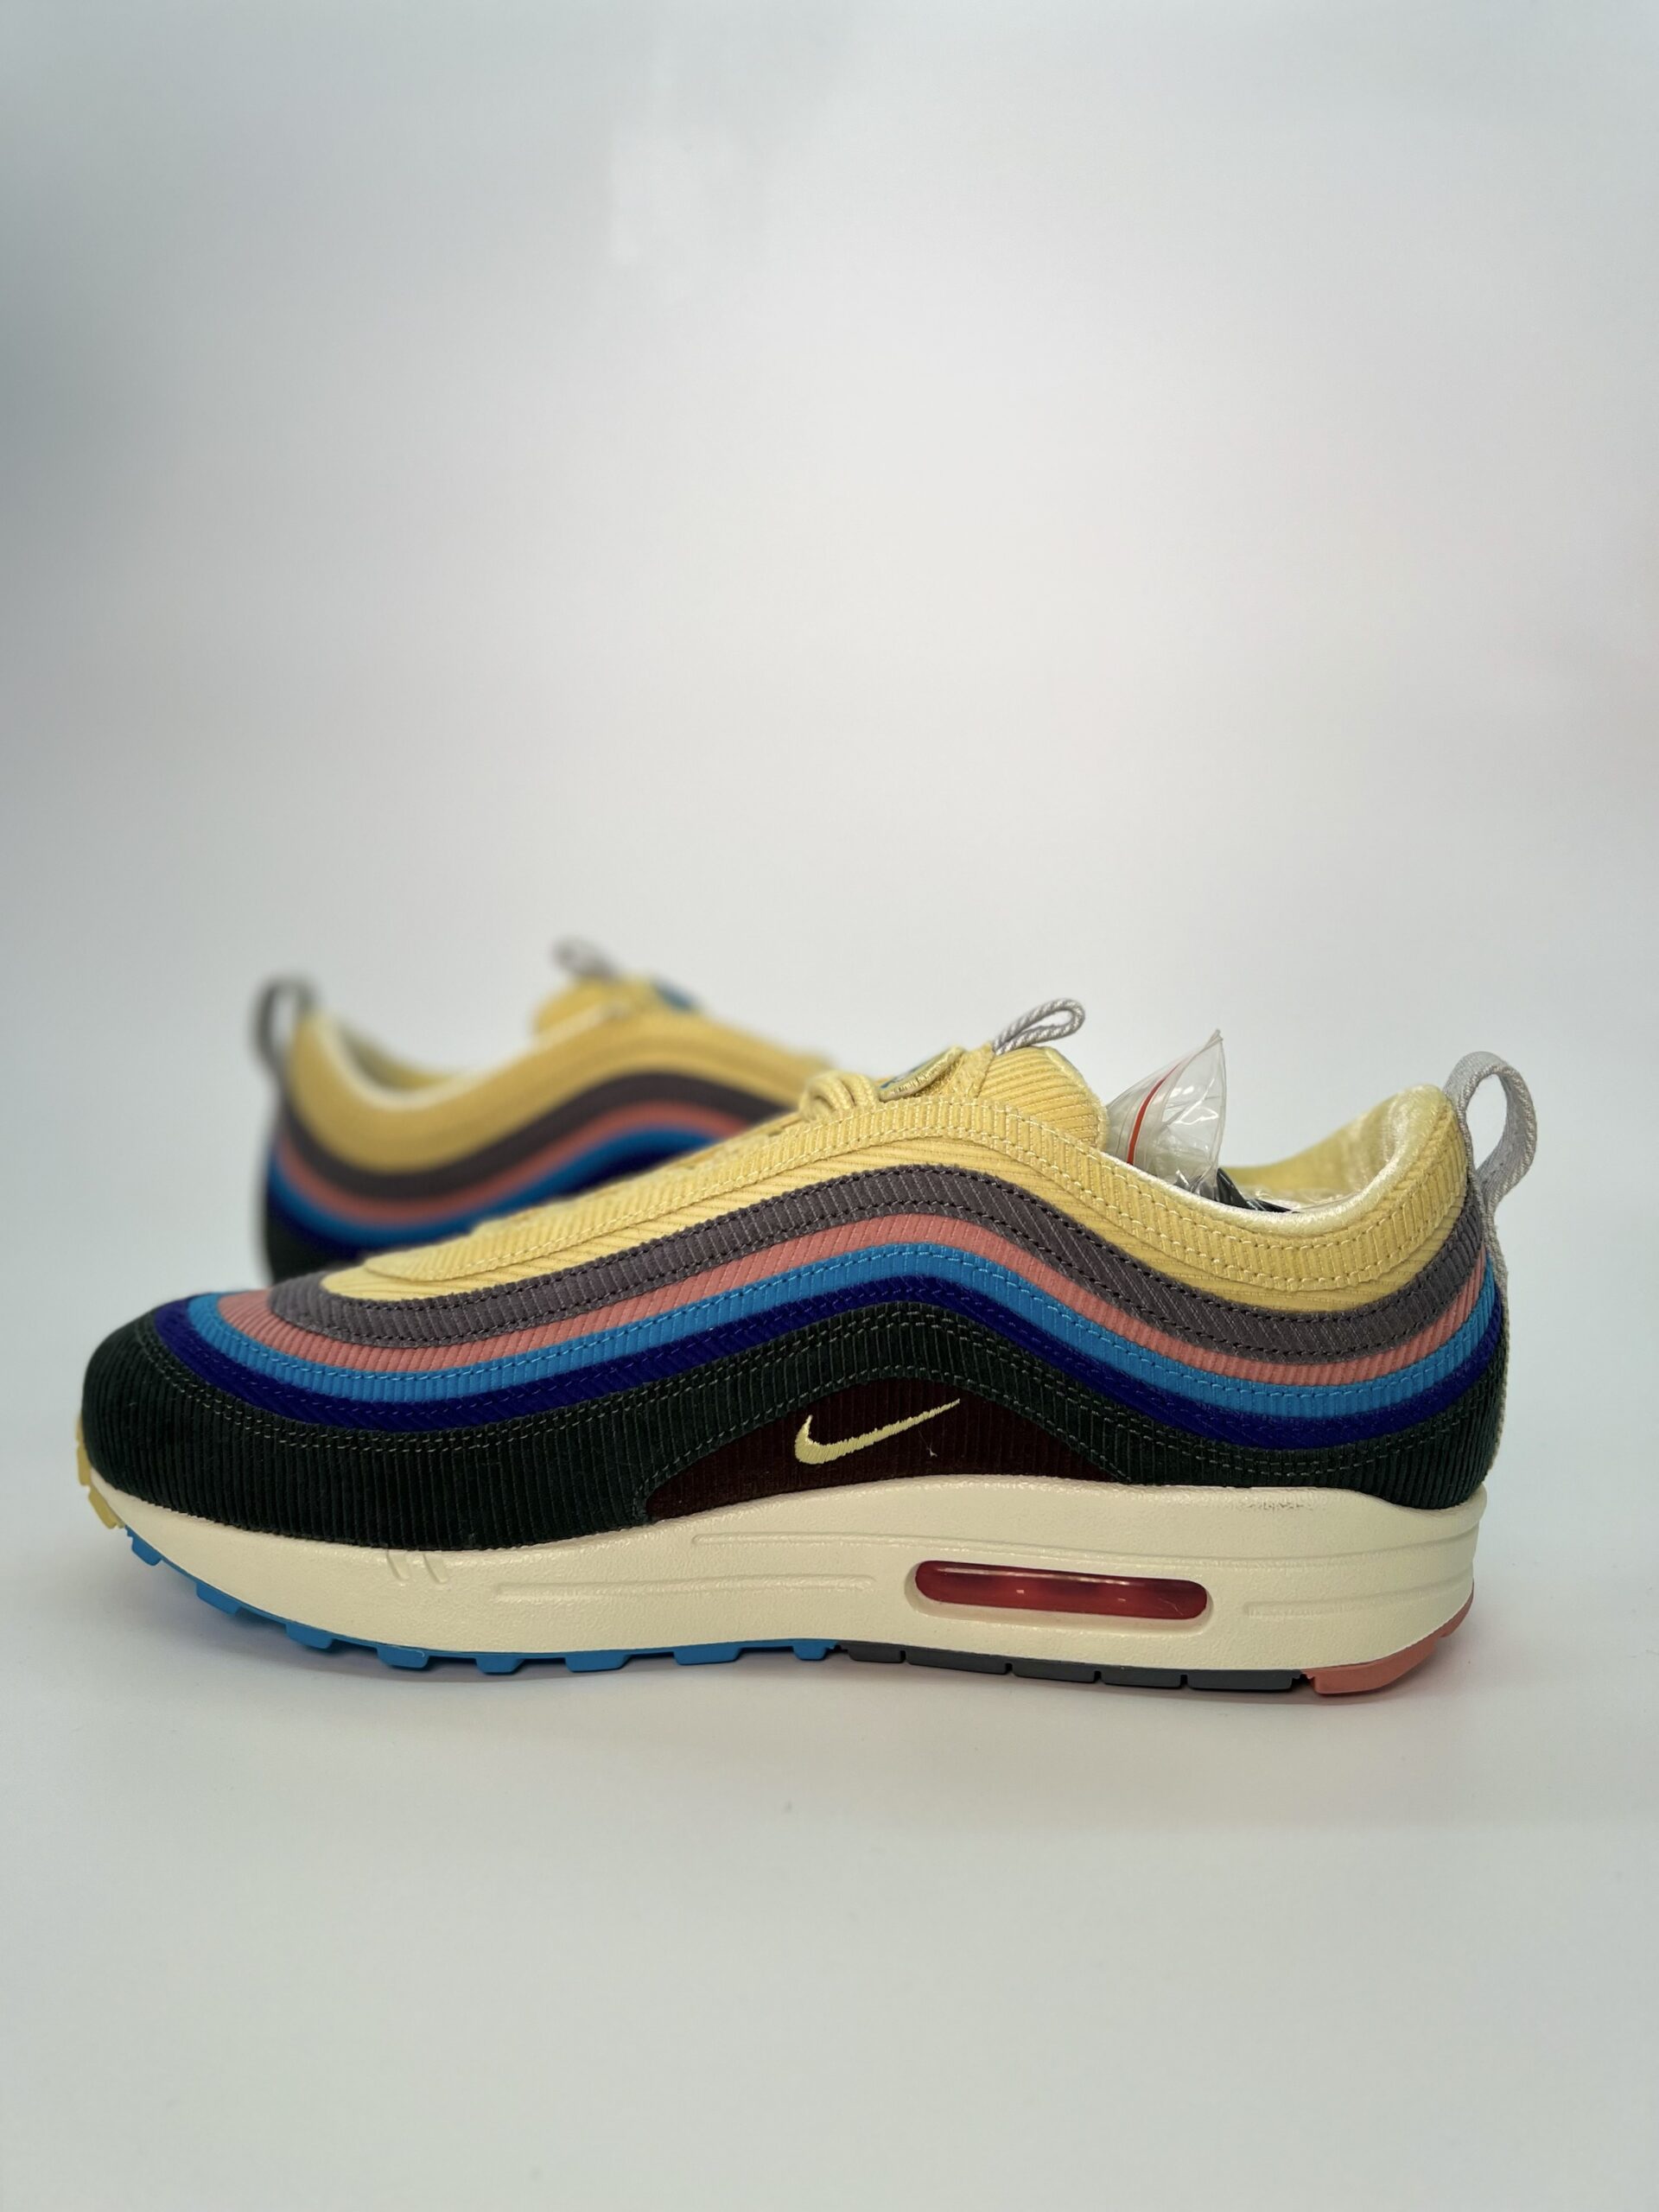 NIKE X SEAN WOTHERSPOON AIR MAX 97 UK7.5 NEW : CBEStores